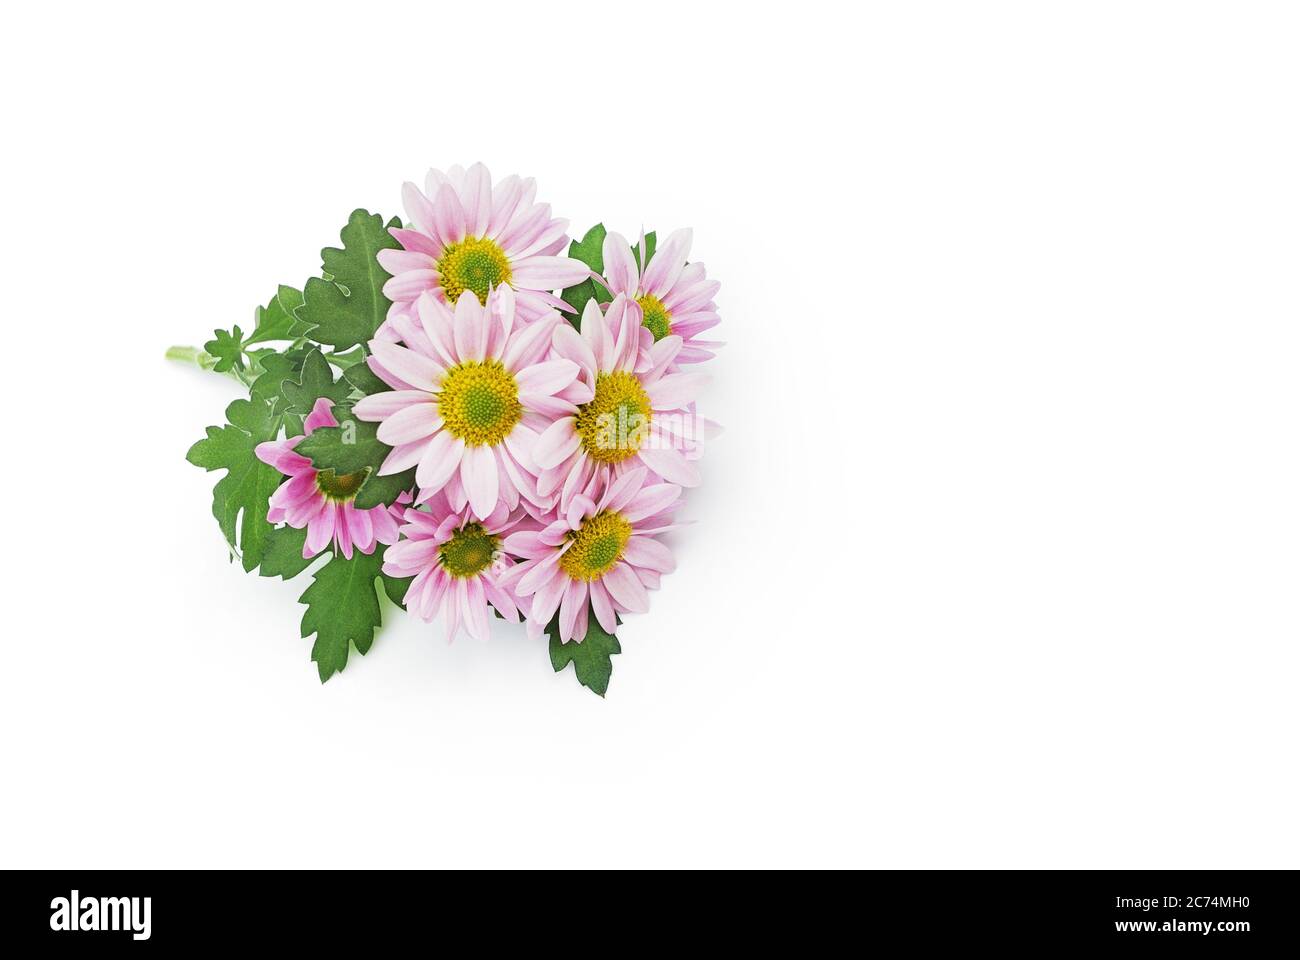 asters in pink color lie on white background Stock Photo